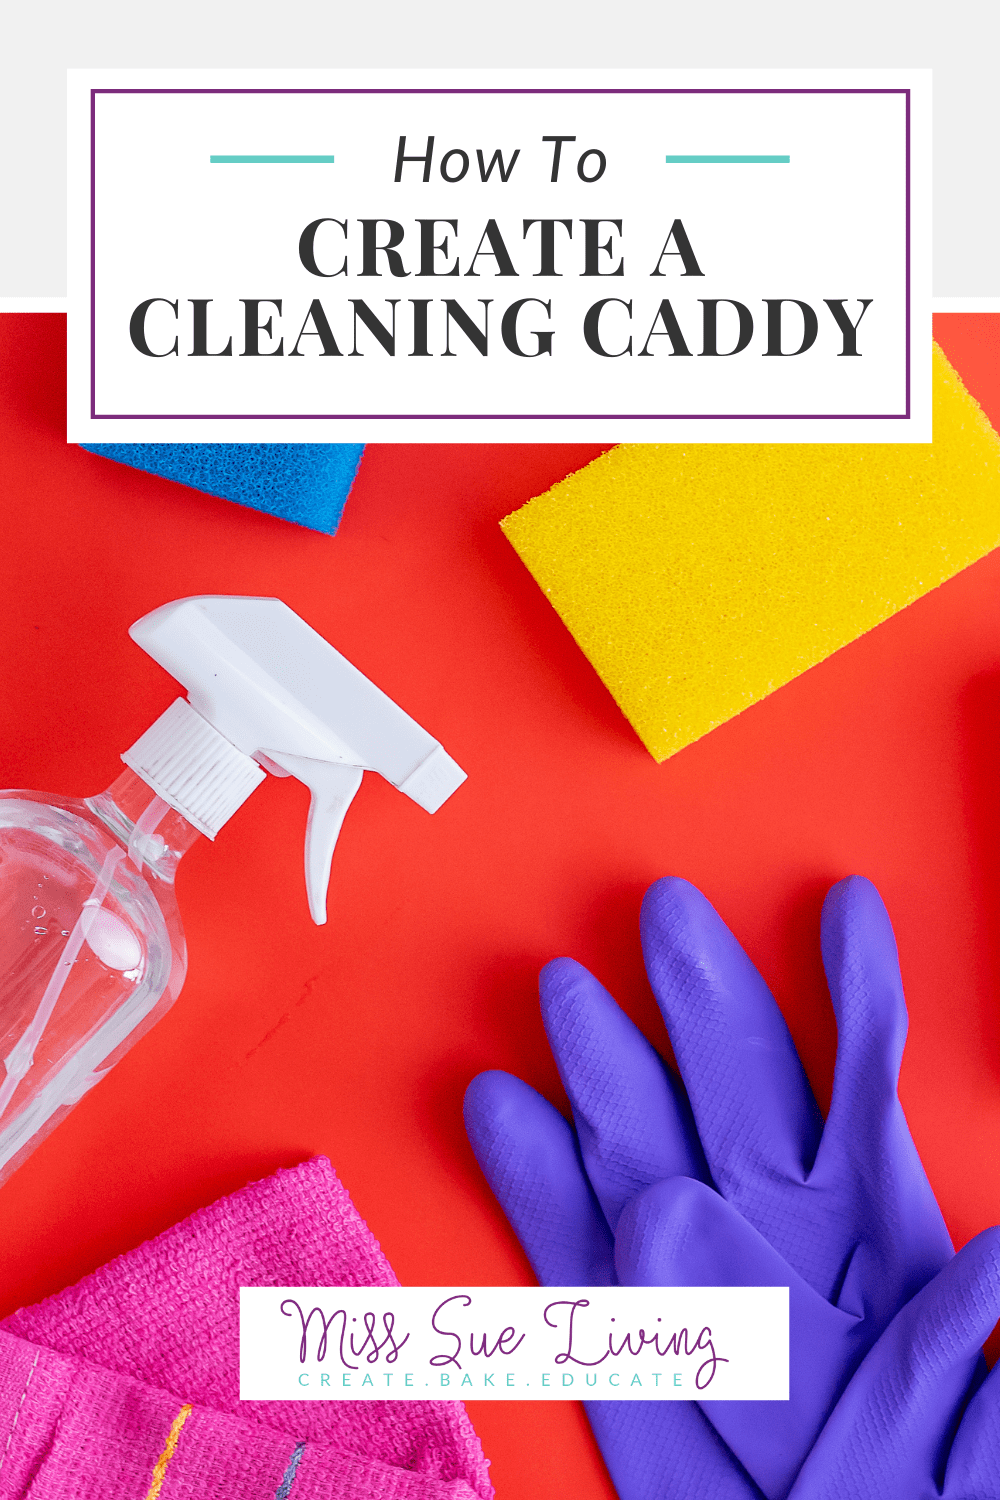 A Cleaning Caddy Will Help You Level Up Your Cleaning Game - Miss Sue Living